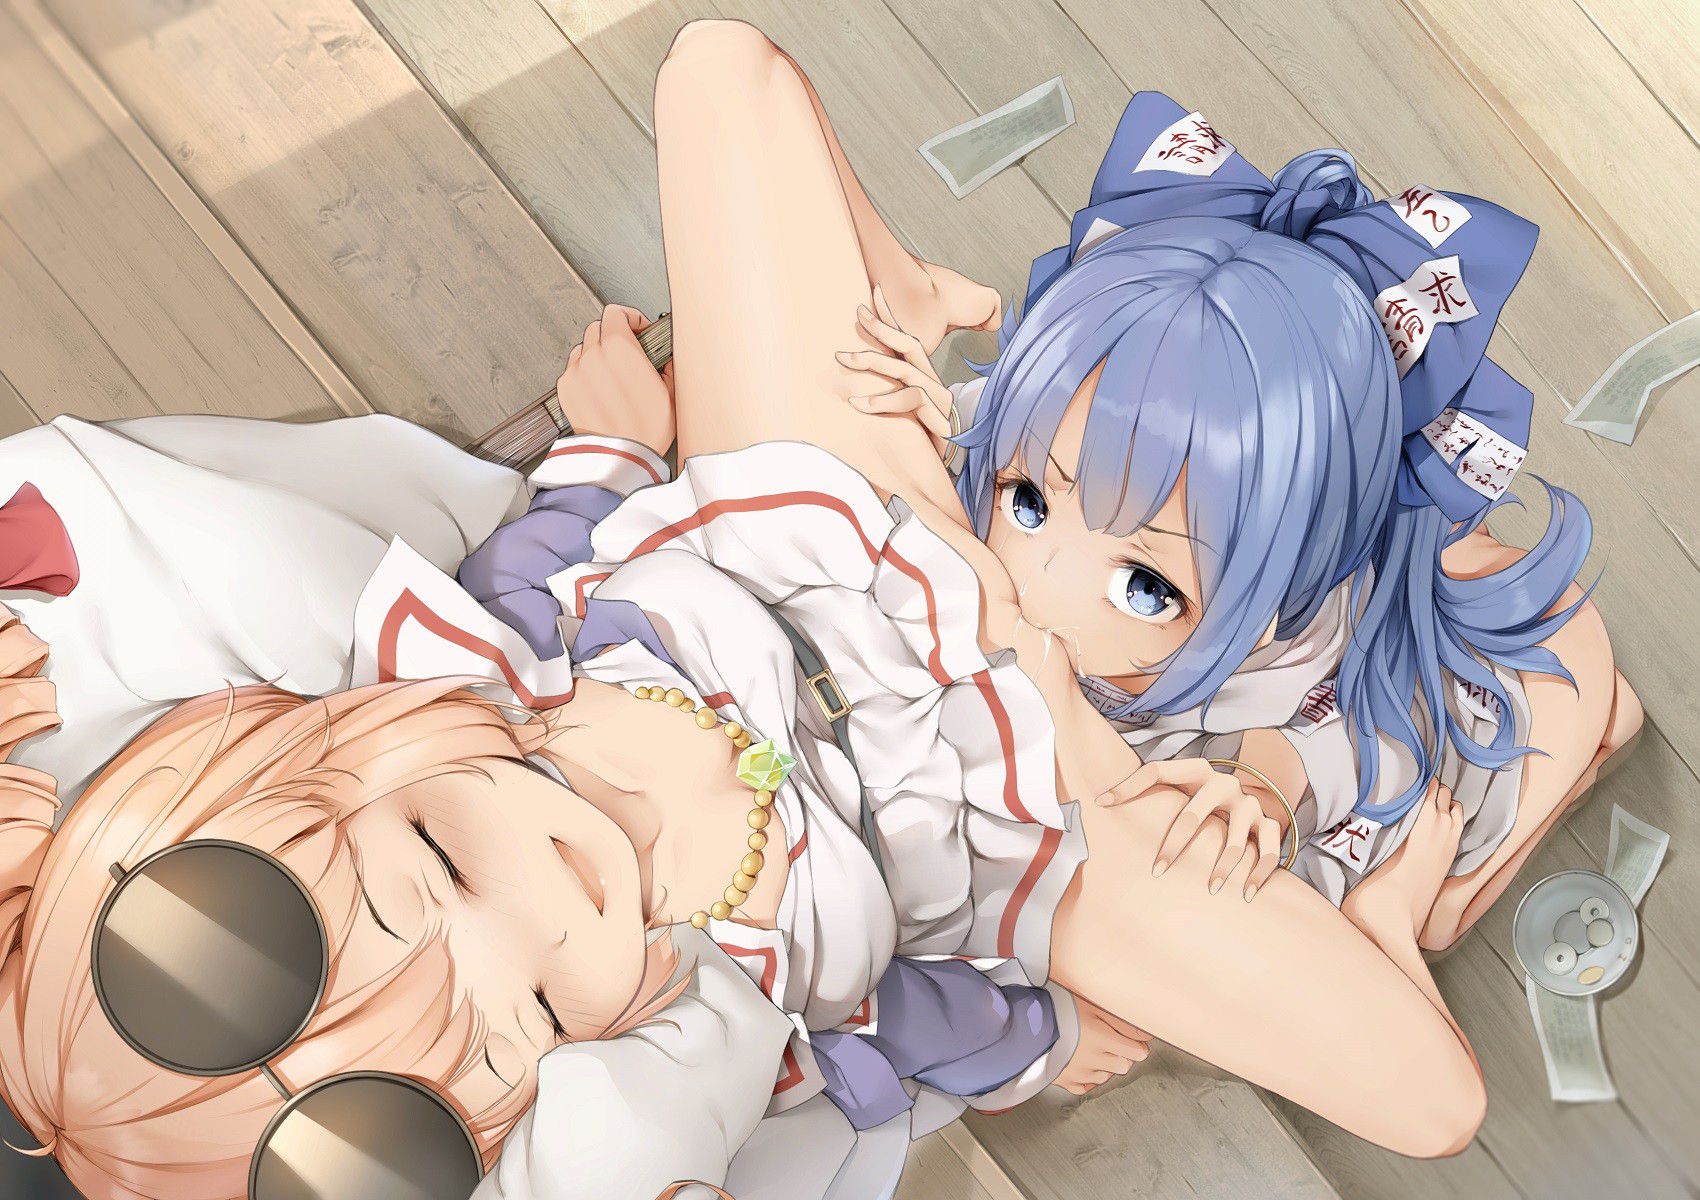 I envy you. Mix me too! Yuri two-dimensional erotic image between girls who are relentless in Lezplay 10